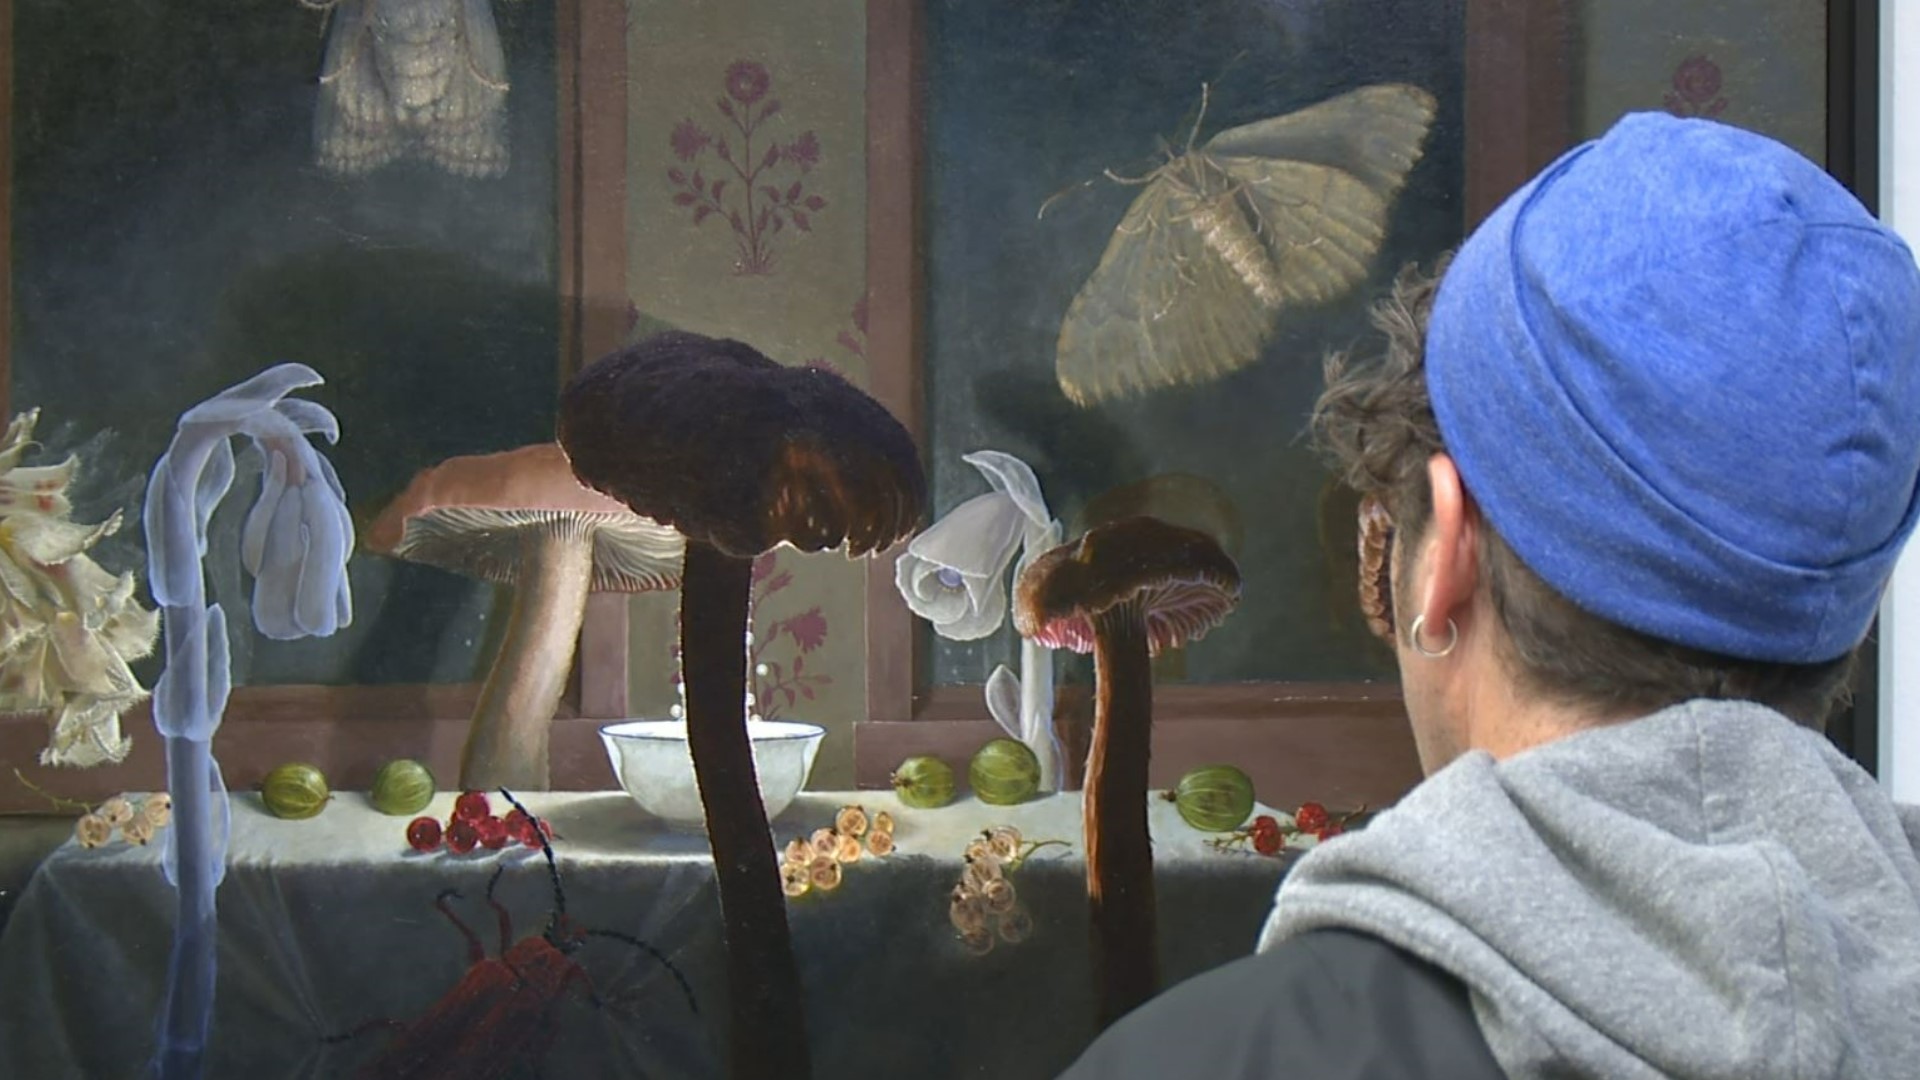 Roq La Rue Gallery began as an experiment. Now it's the nation's leading purveyor of "pop surrealism." #k5evening